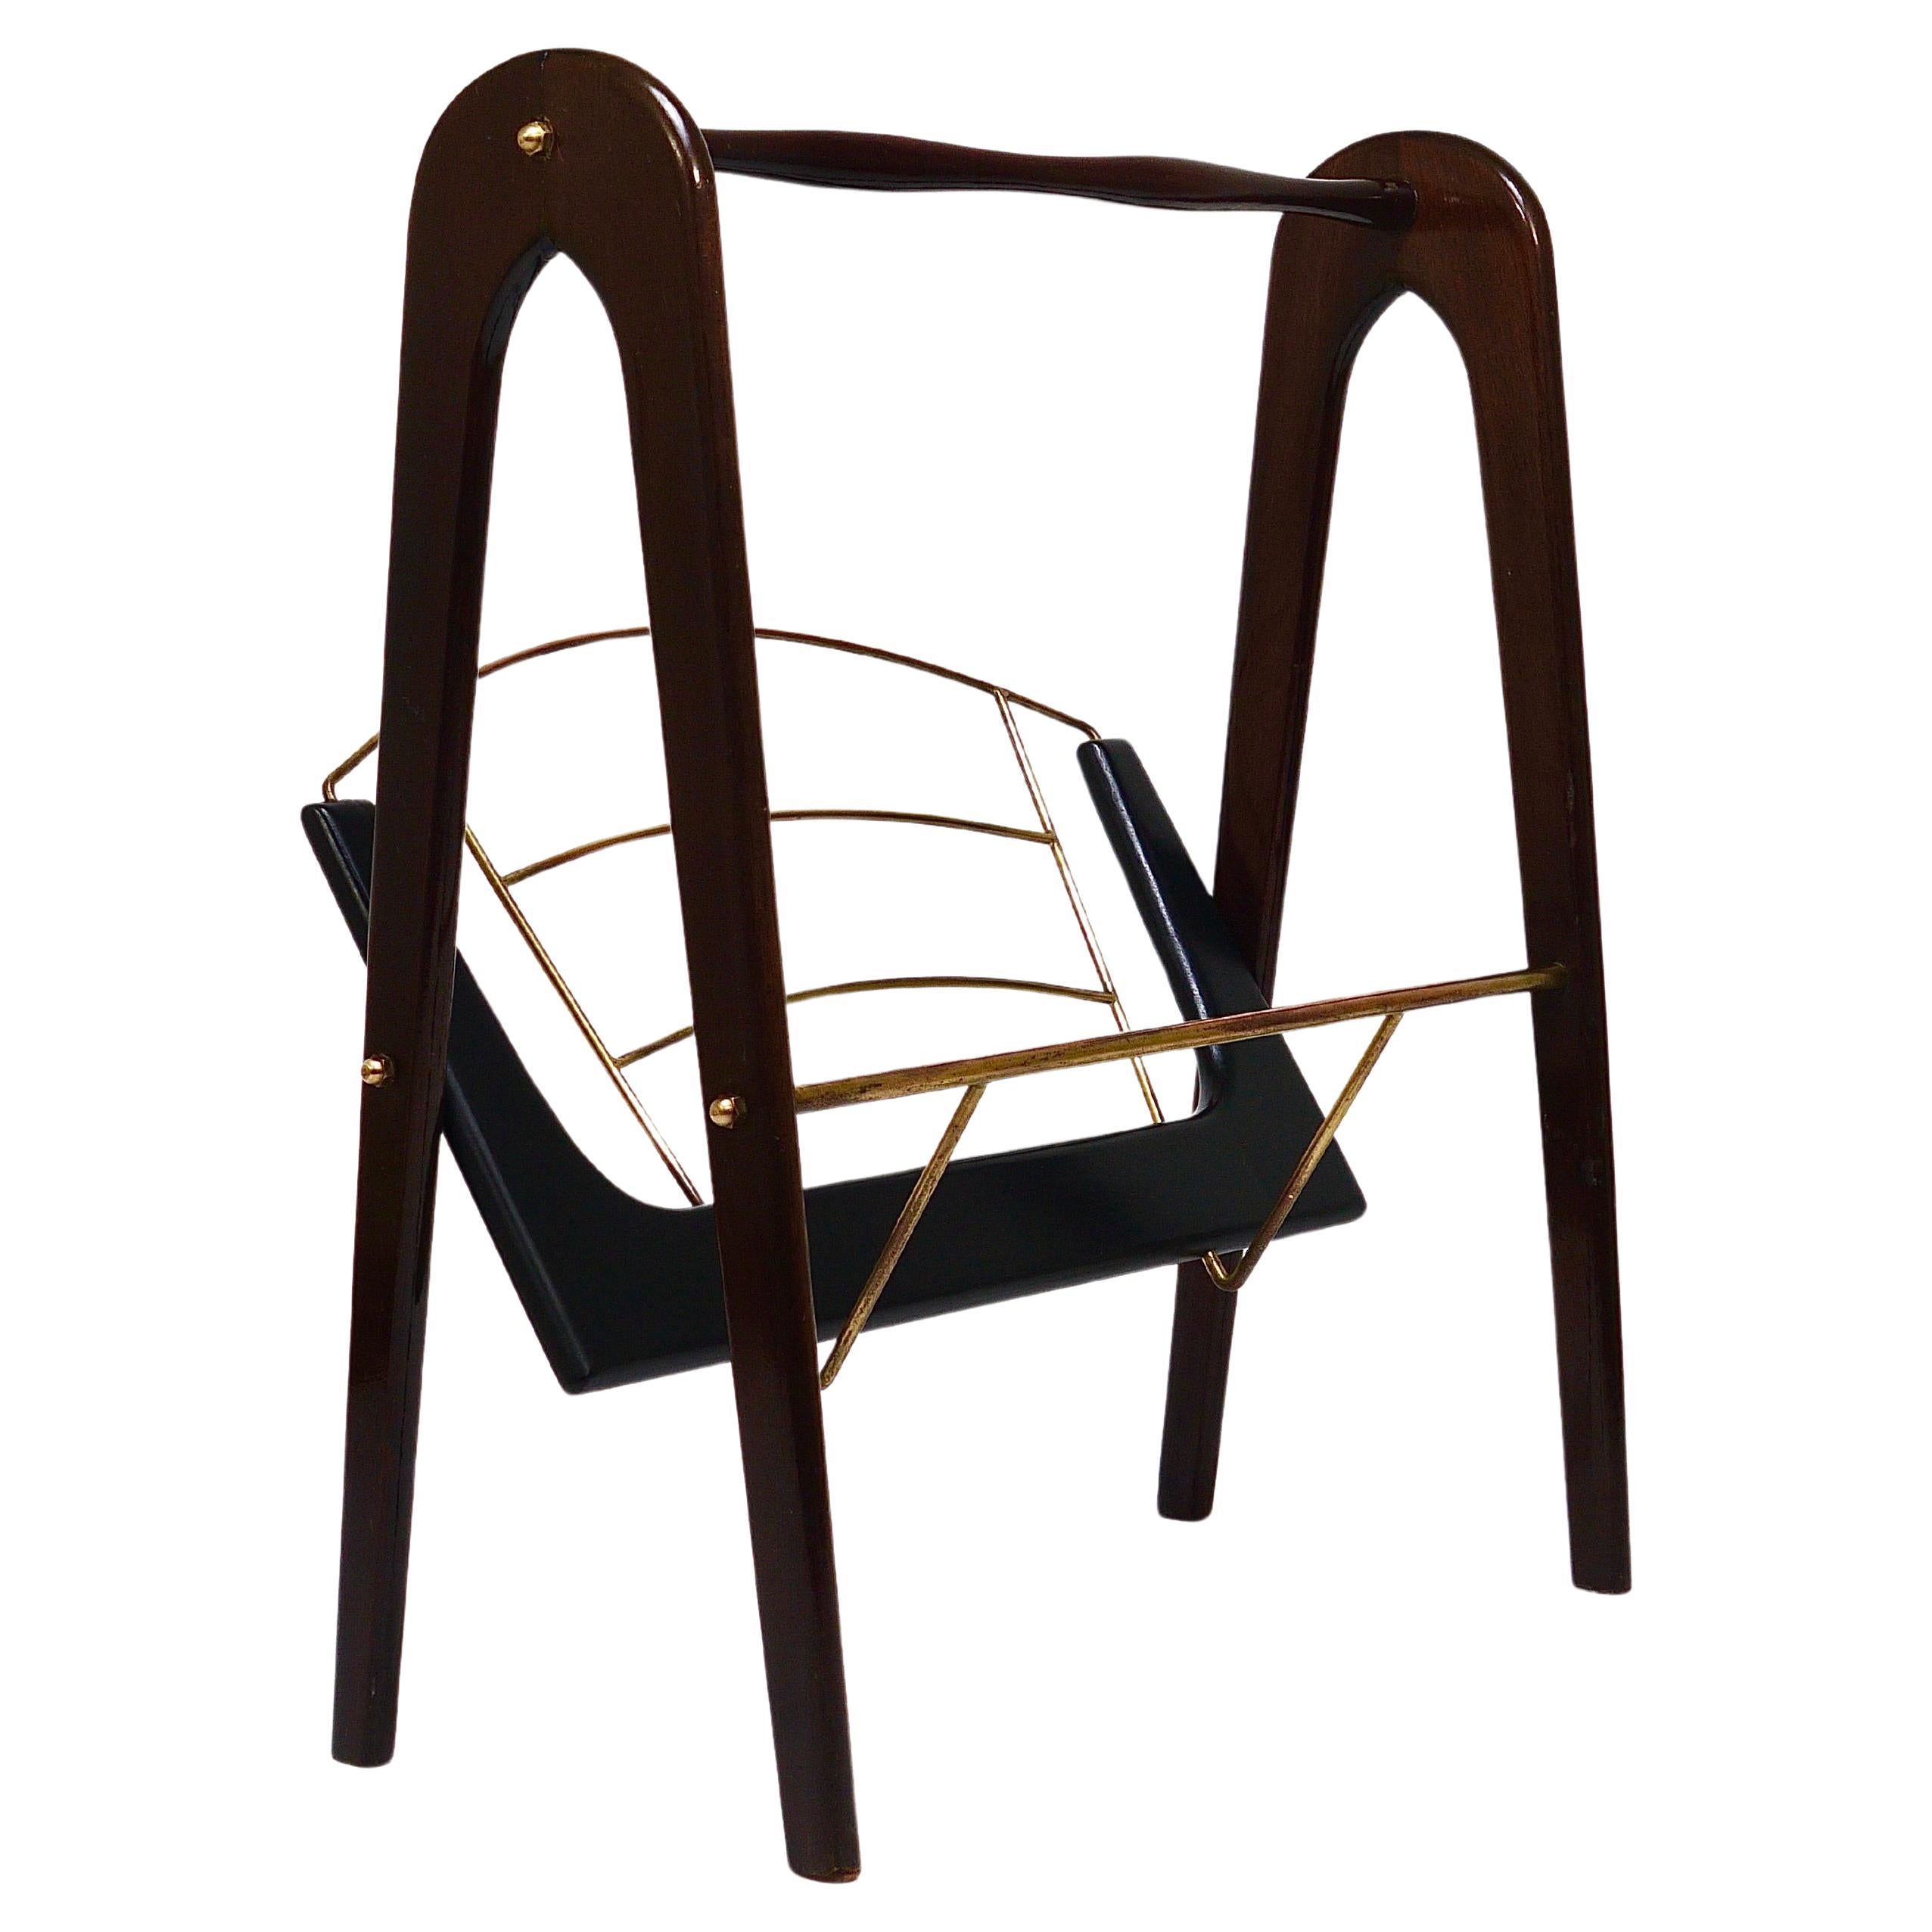 Cesare Lacca Midcentury Magazine Rack, Mahogany & Brass, Italy, 1950s For Sale